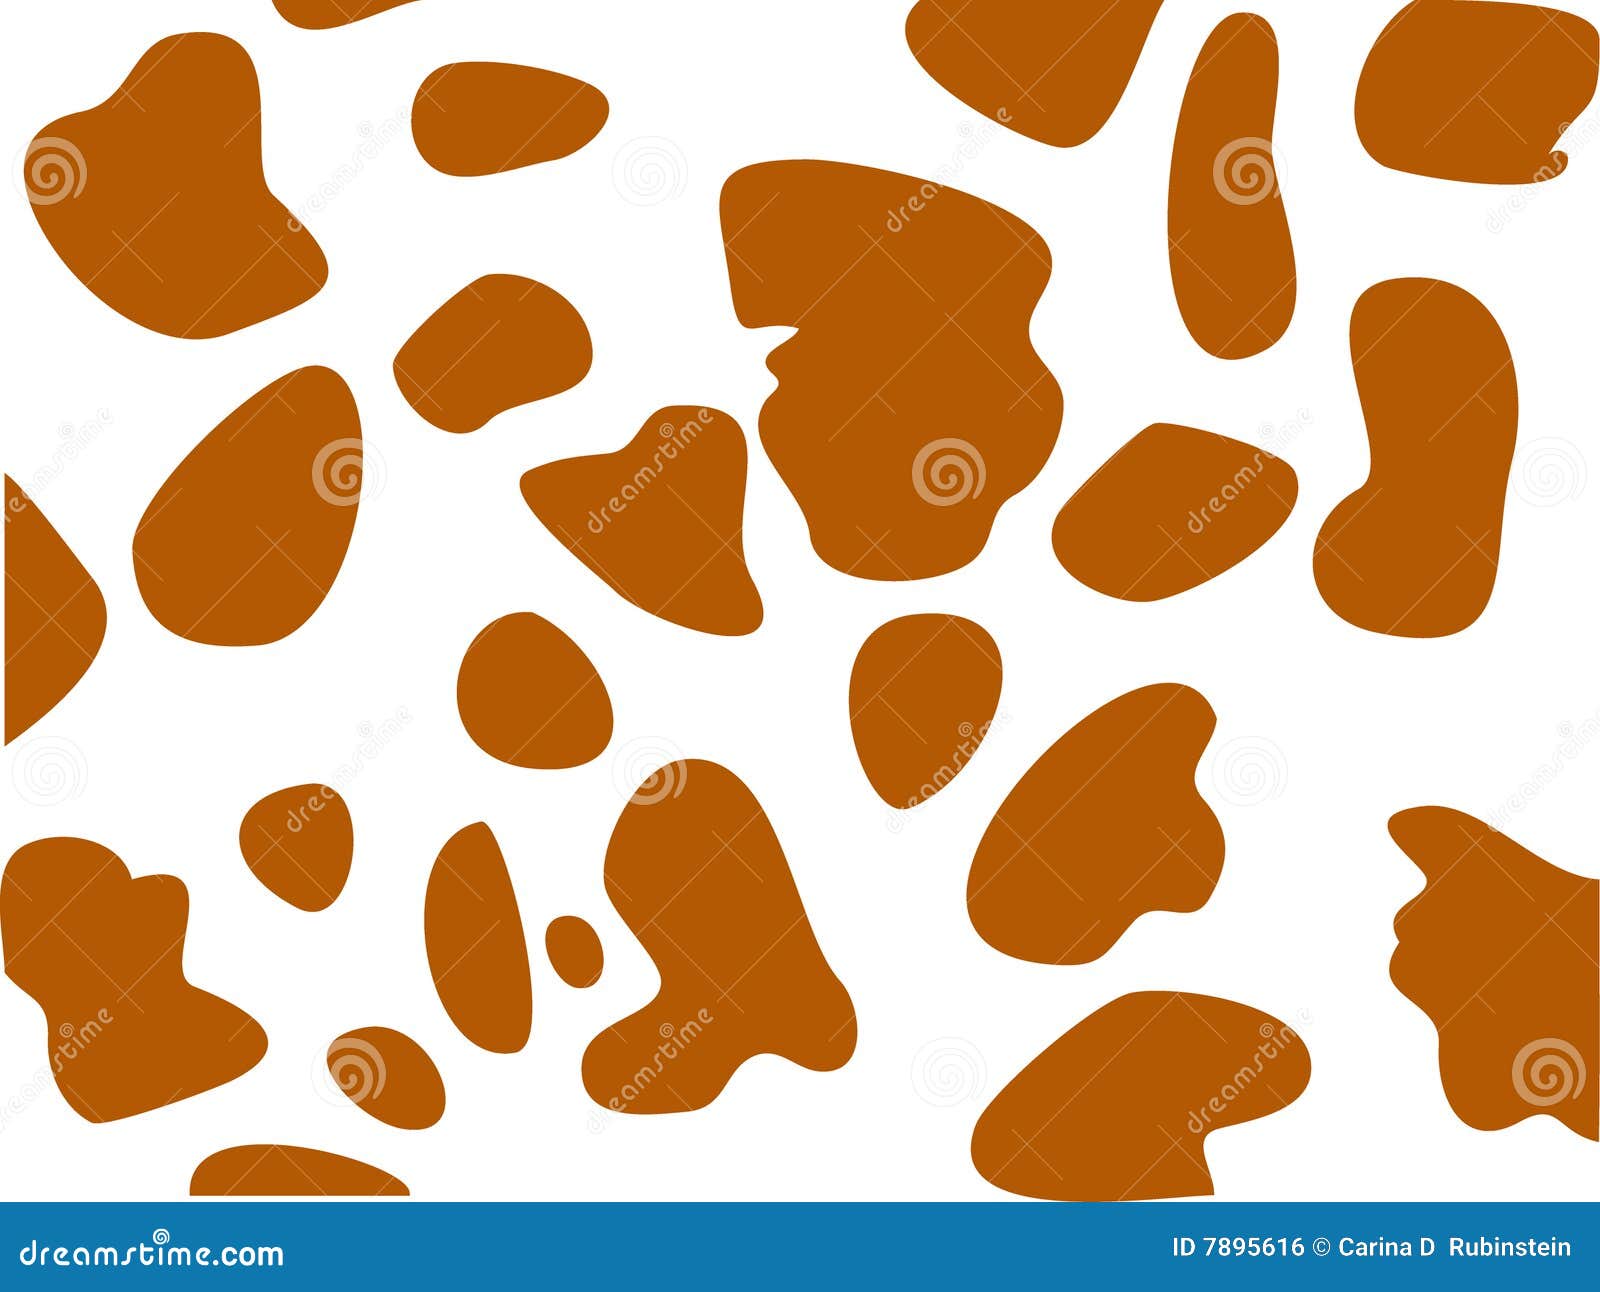 cow pattern clipart - photo #31